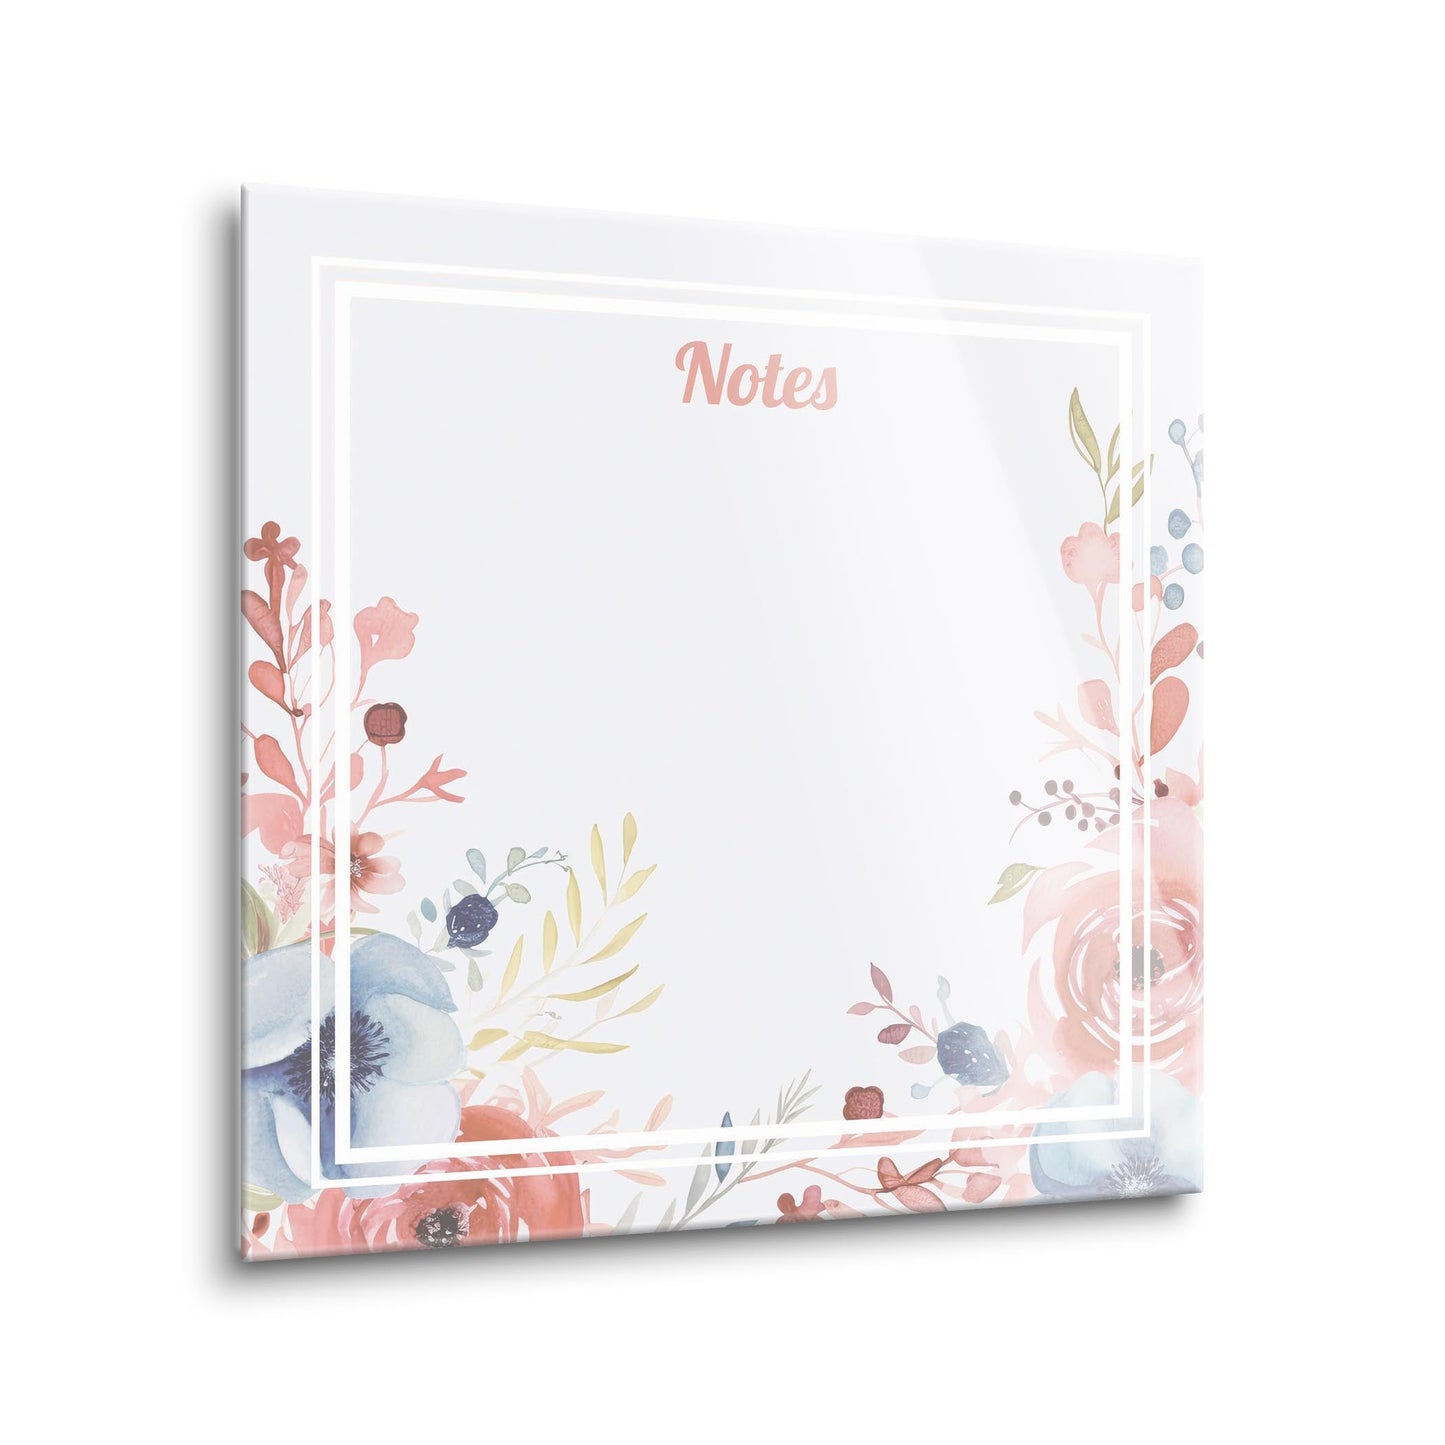 Mother's Day Tracker Floral Notes | 12x12